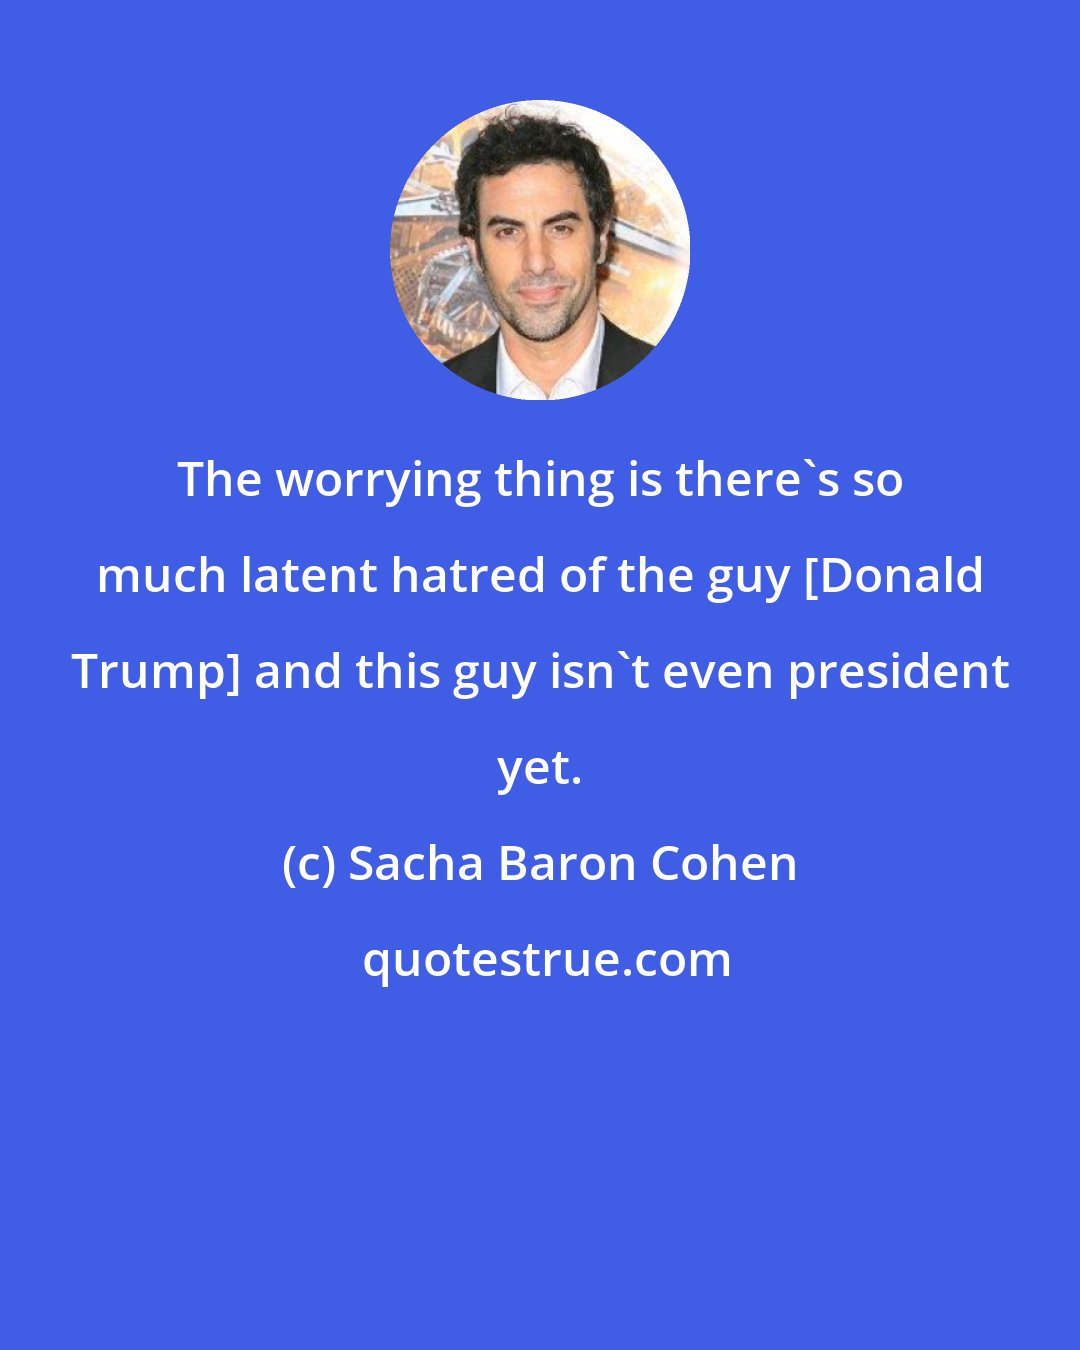 Sacha Baron Cohen: The worrying thing is there's so much latent hatred of the guy [Donald Trump] and this guy isn't even president yet.